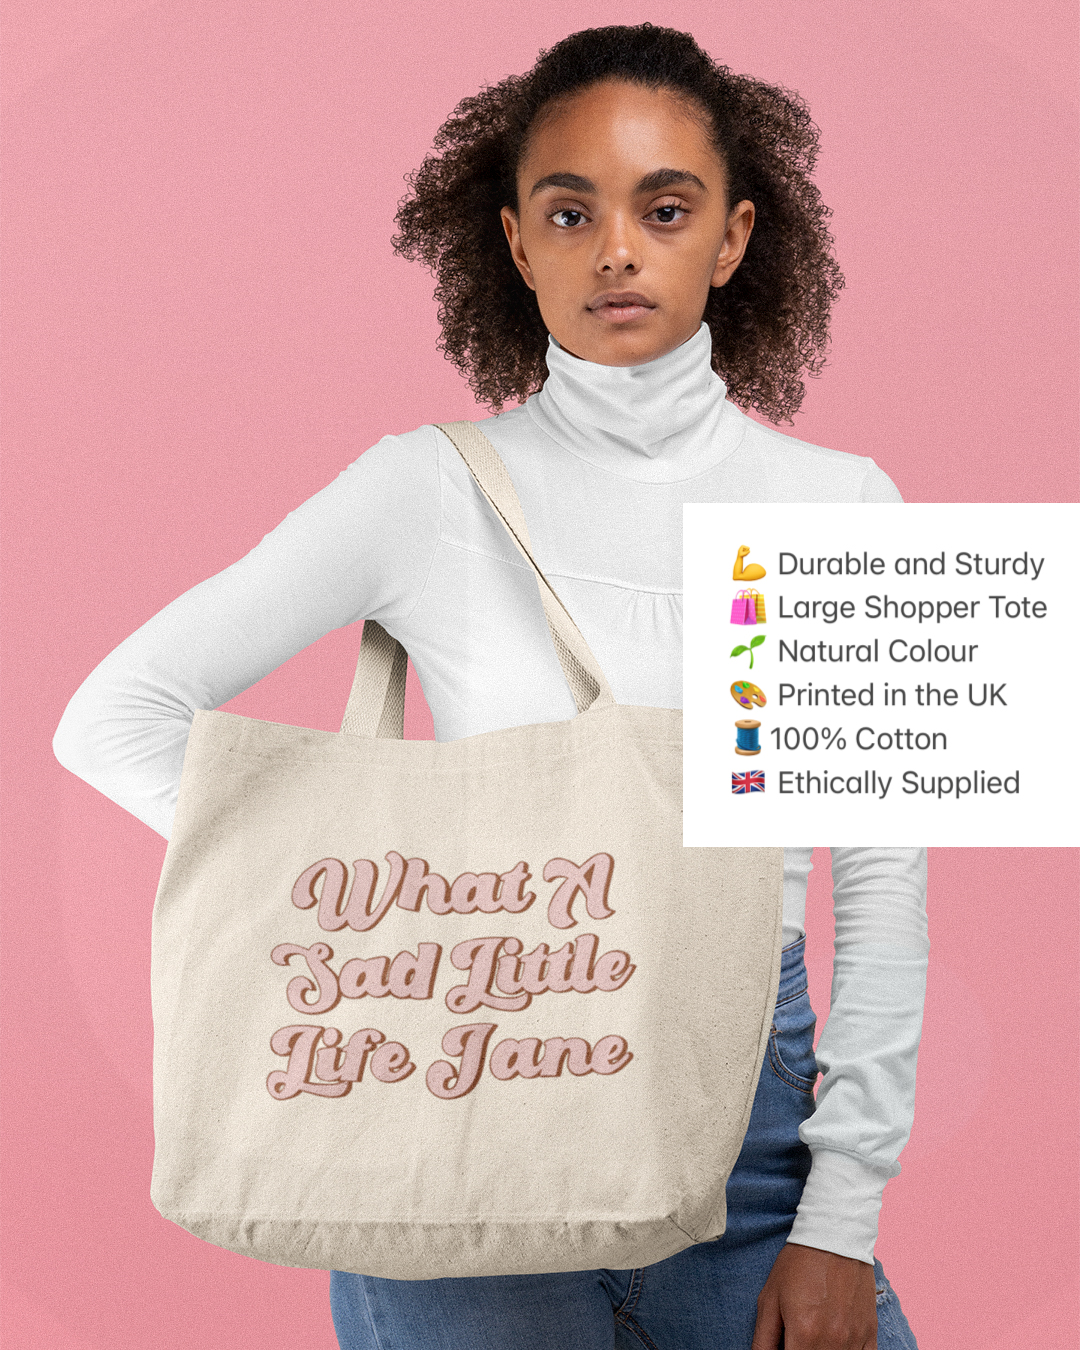 What A Sad Little Life Jane (Come Dine With Me Inspired) Tote Bag - What A Sad Little Life Jane Tote Bag - Come Dine With Me Inspired Tote Bag - British Humour Shopper Tote Bag